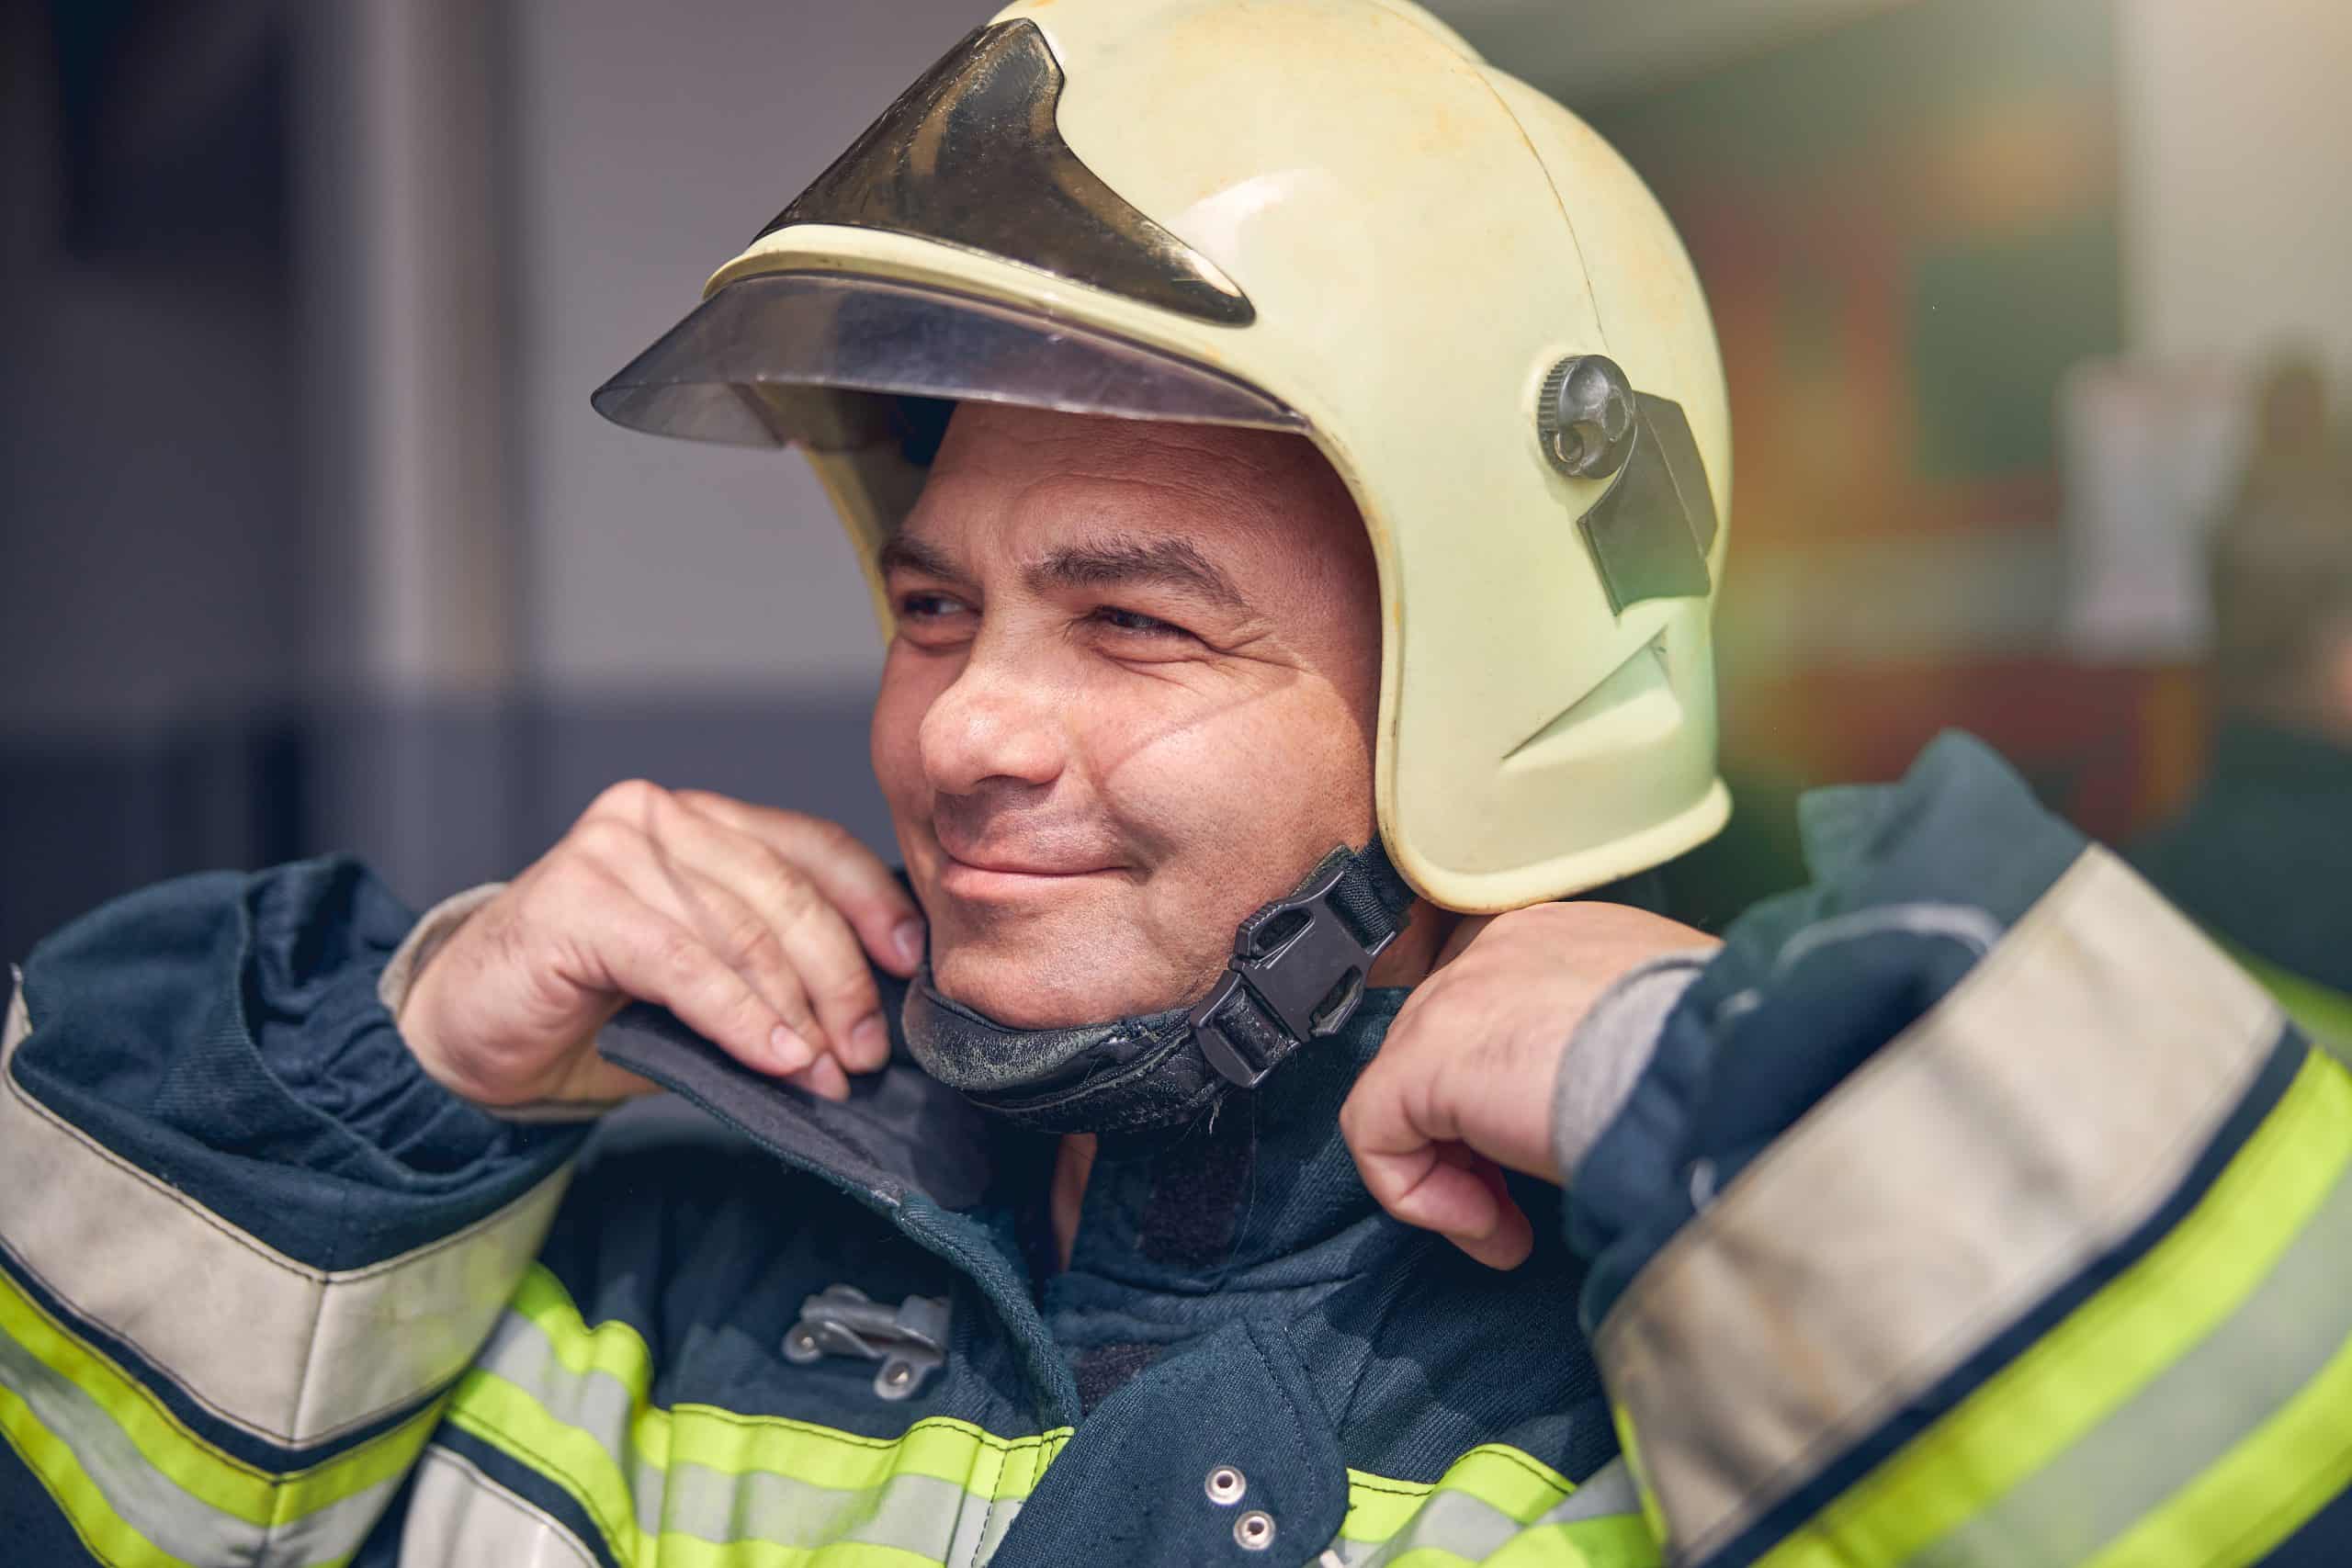 Firefighter first responder smiling with resilience, resilience for first responders